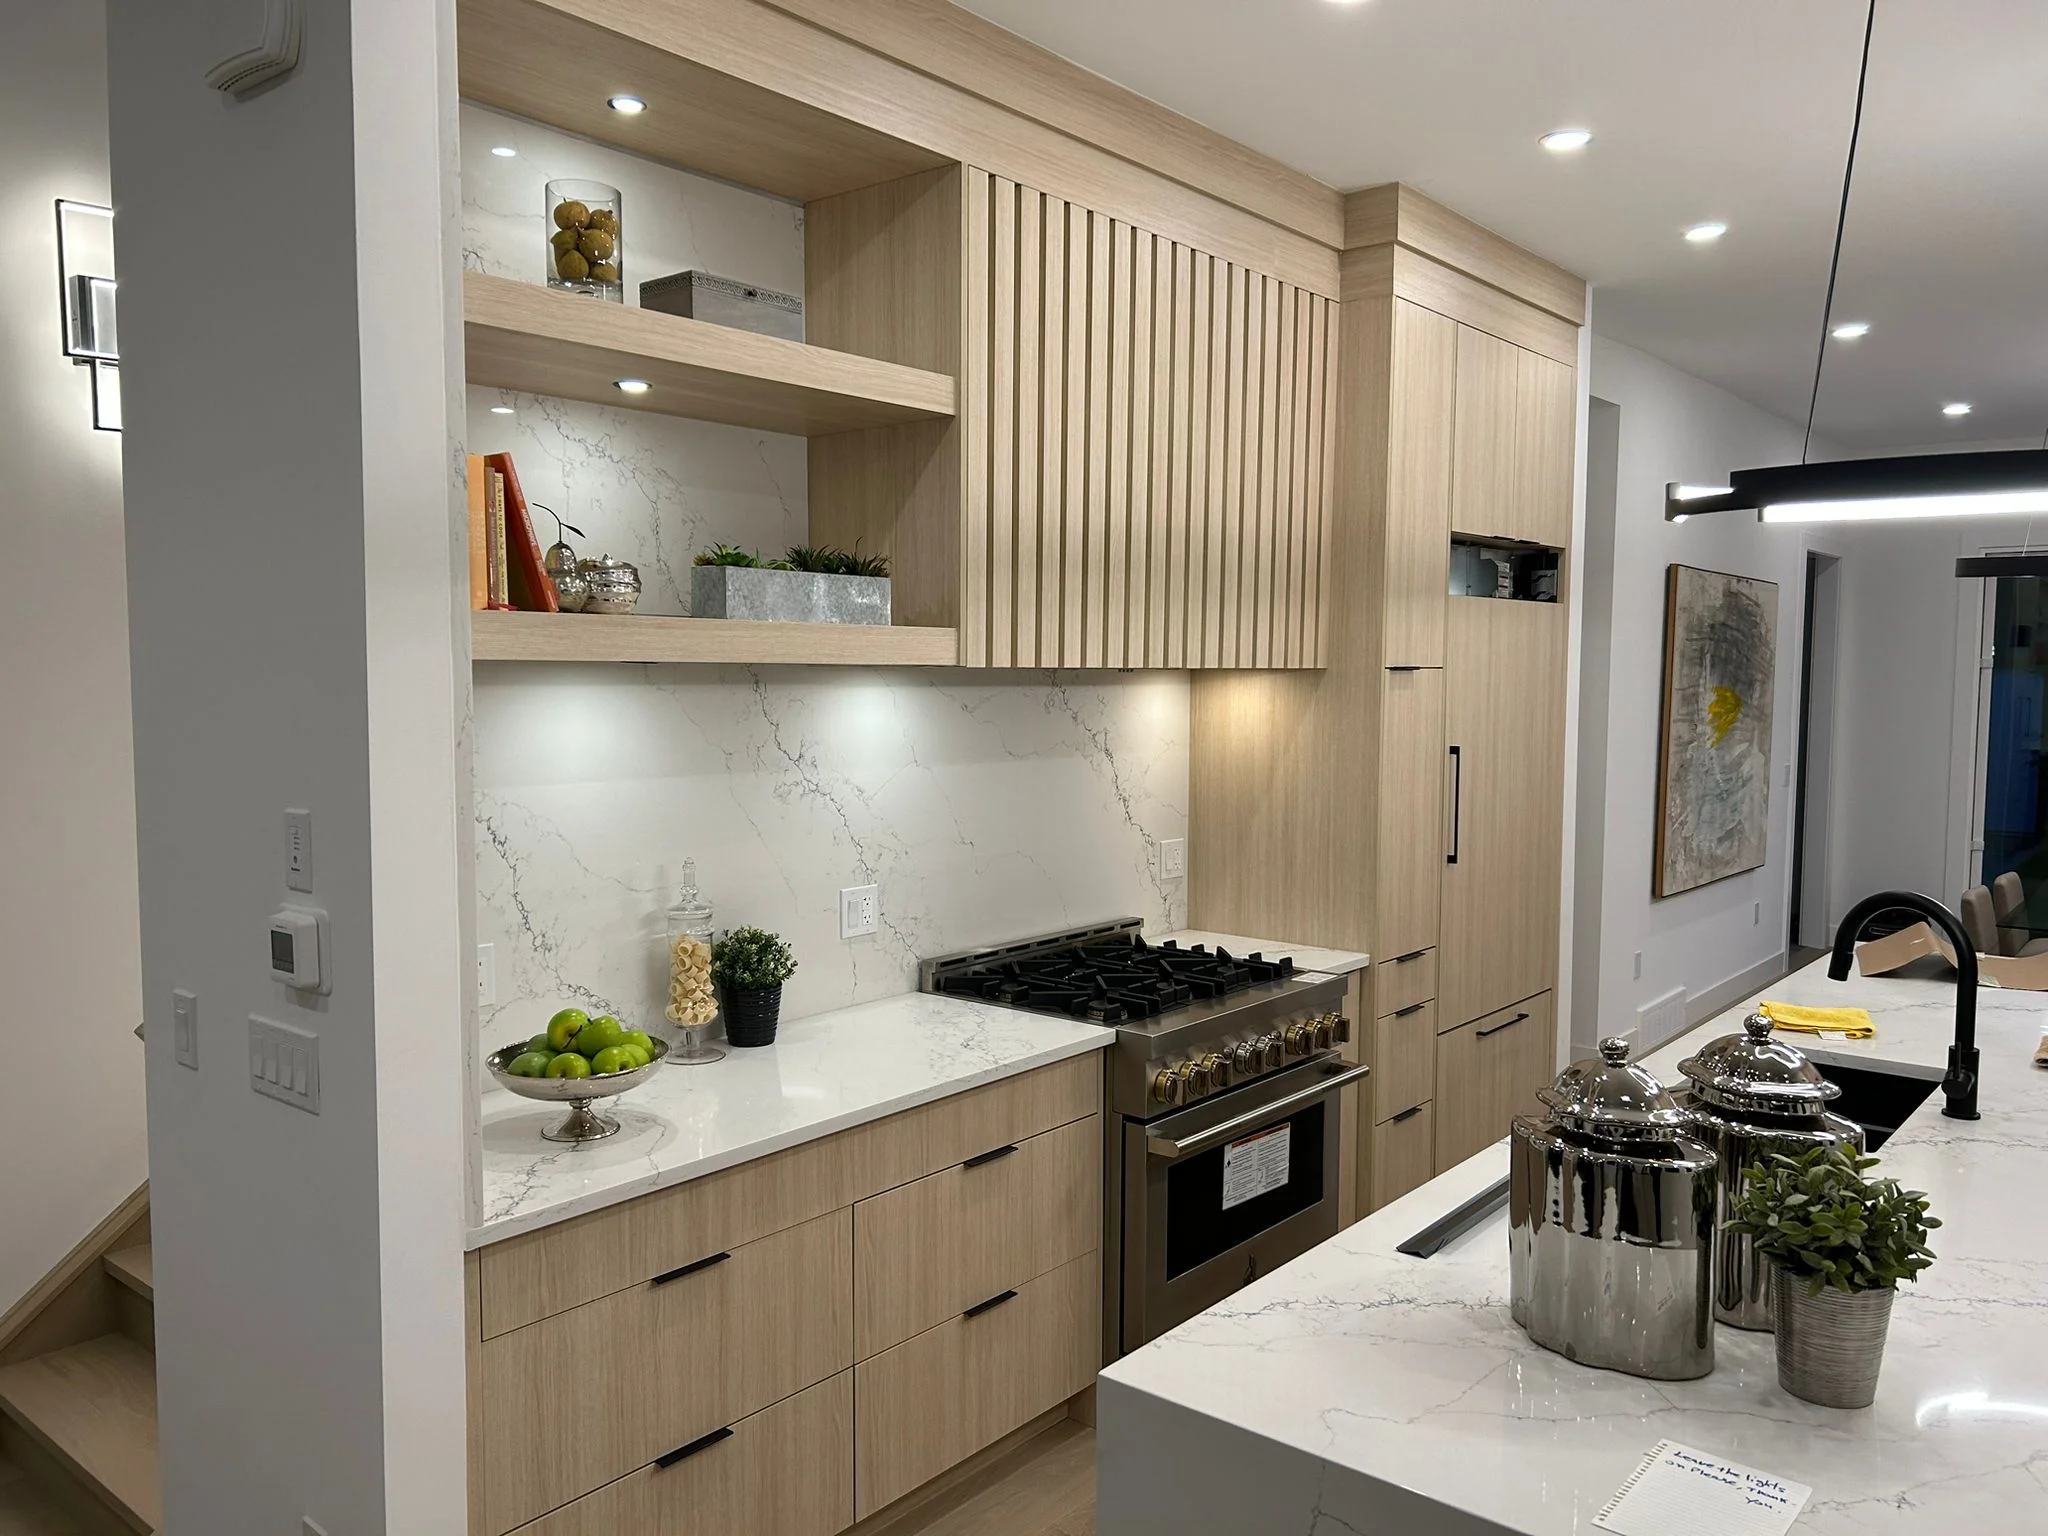 About Roots Kitchen Cabinets Calgary